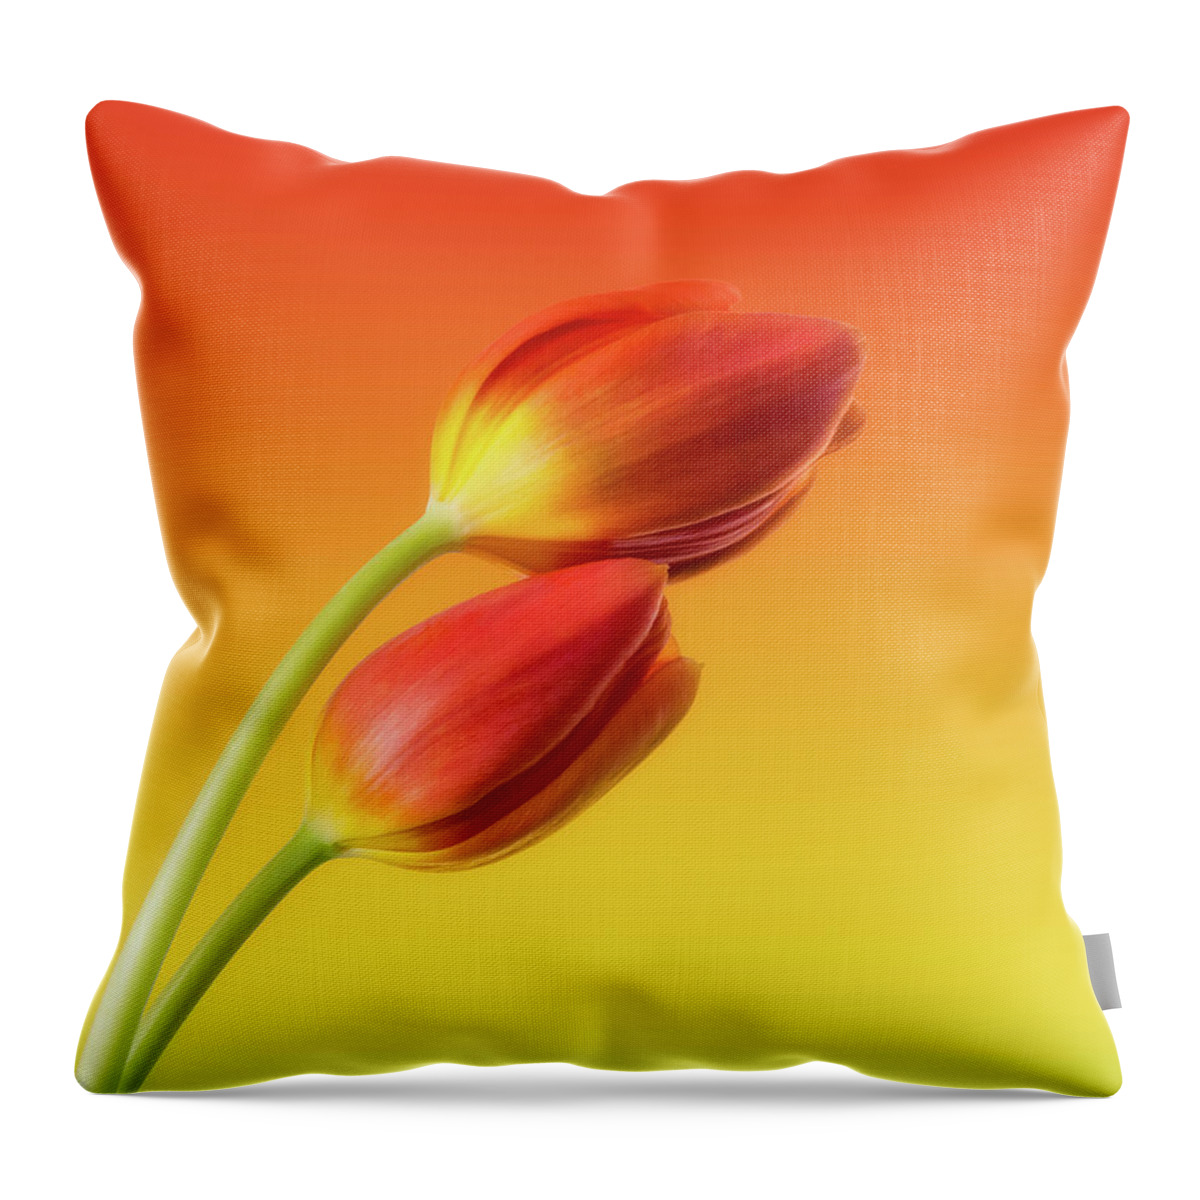 Tulips Throw Pillow featuring the photograph Colorful Tulips by Wim Lanclus